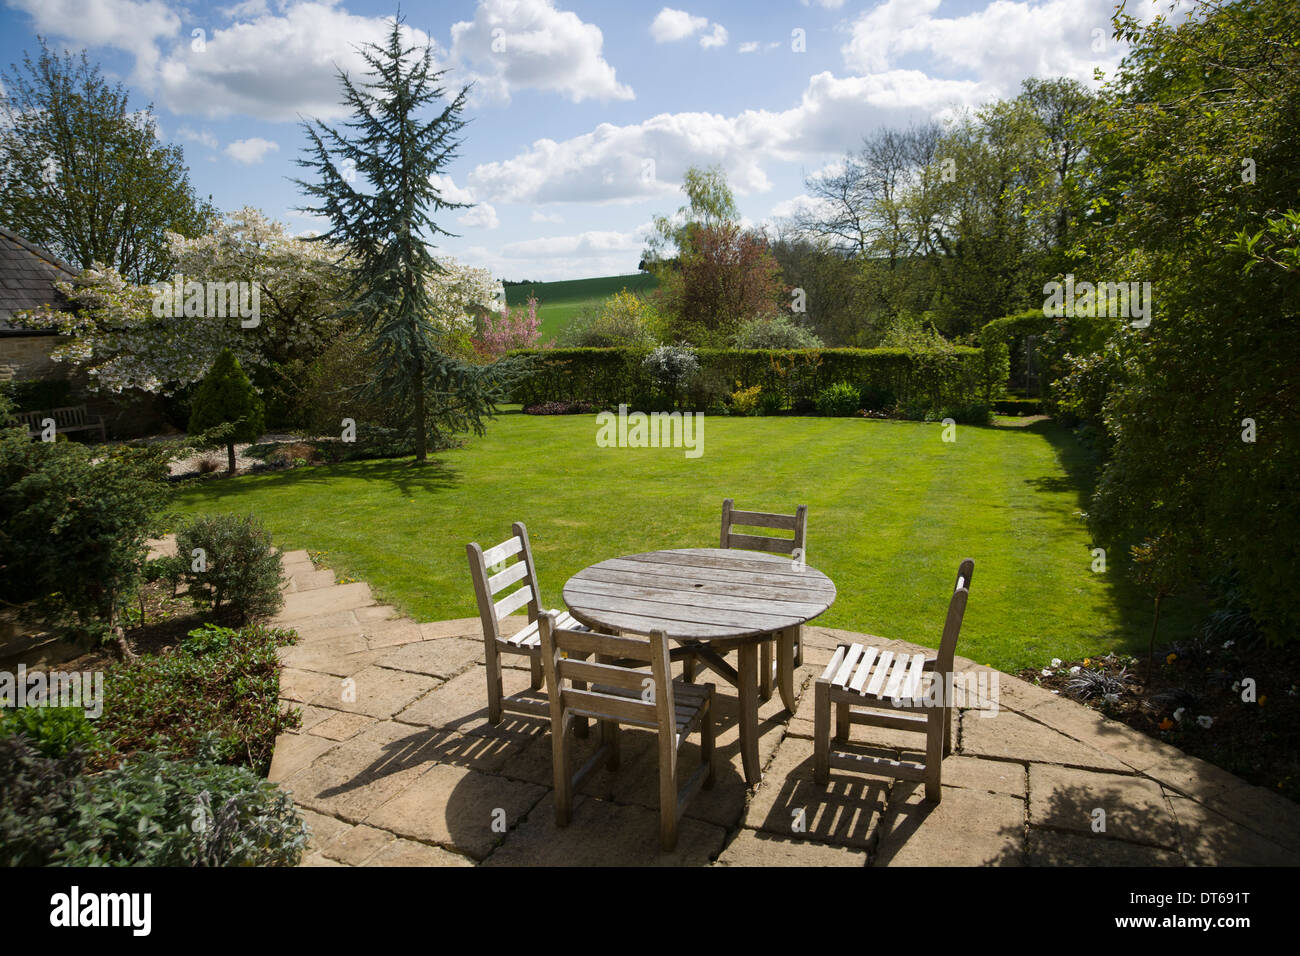 UK gardens. Wooden table and chairs on a patio in a mature garden. Stock Photo